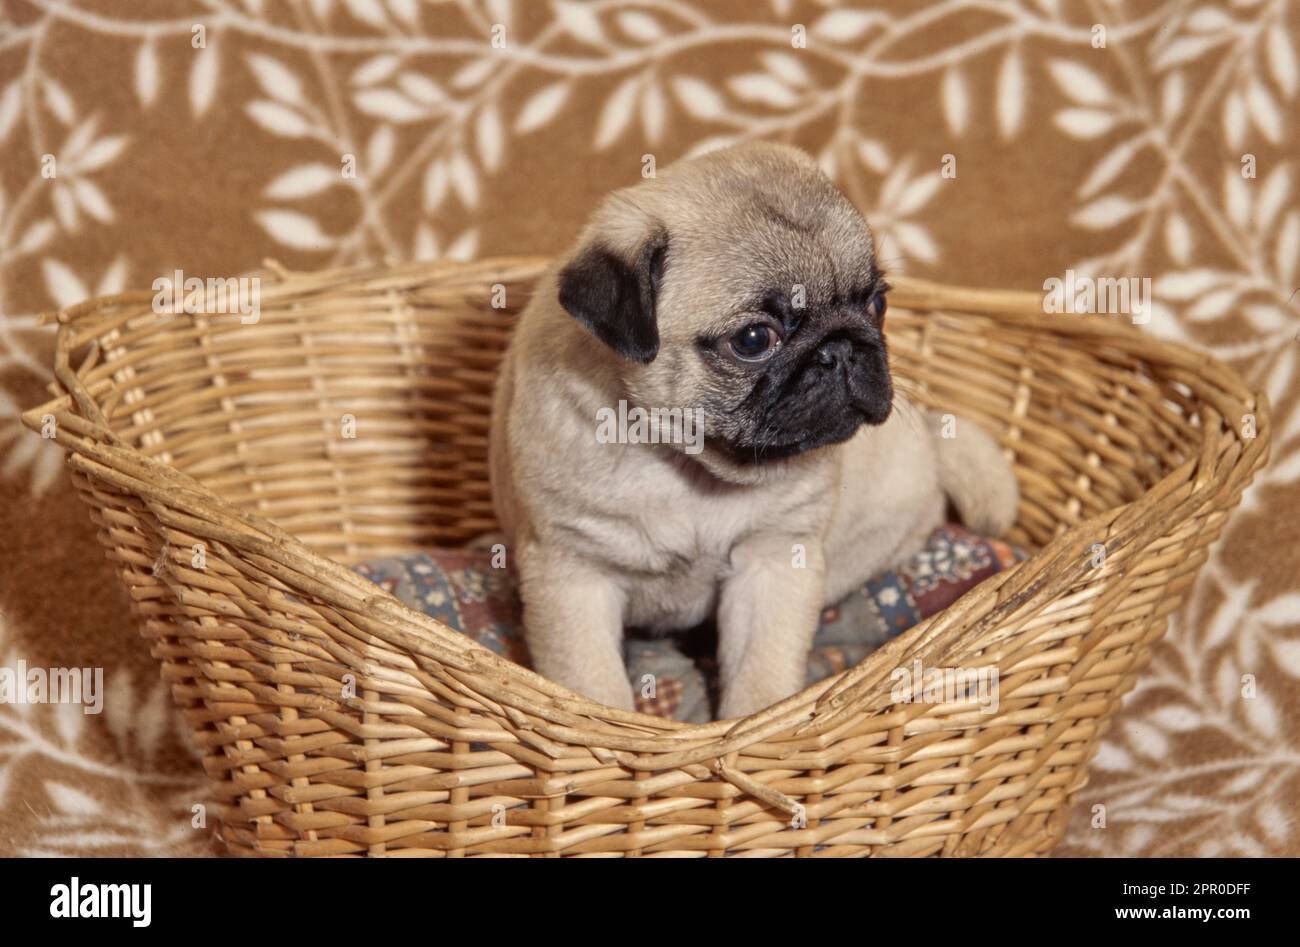 Pug puppy sitting in wicker dog bed on brown blanket with leaves design Stock Photo